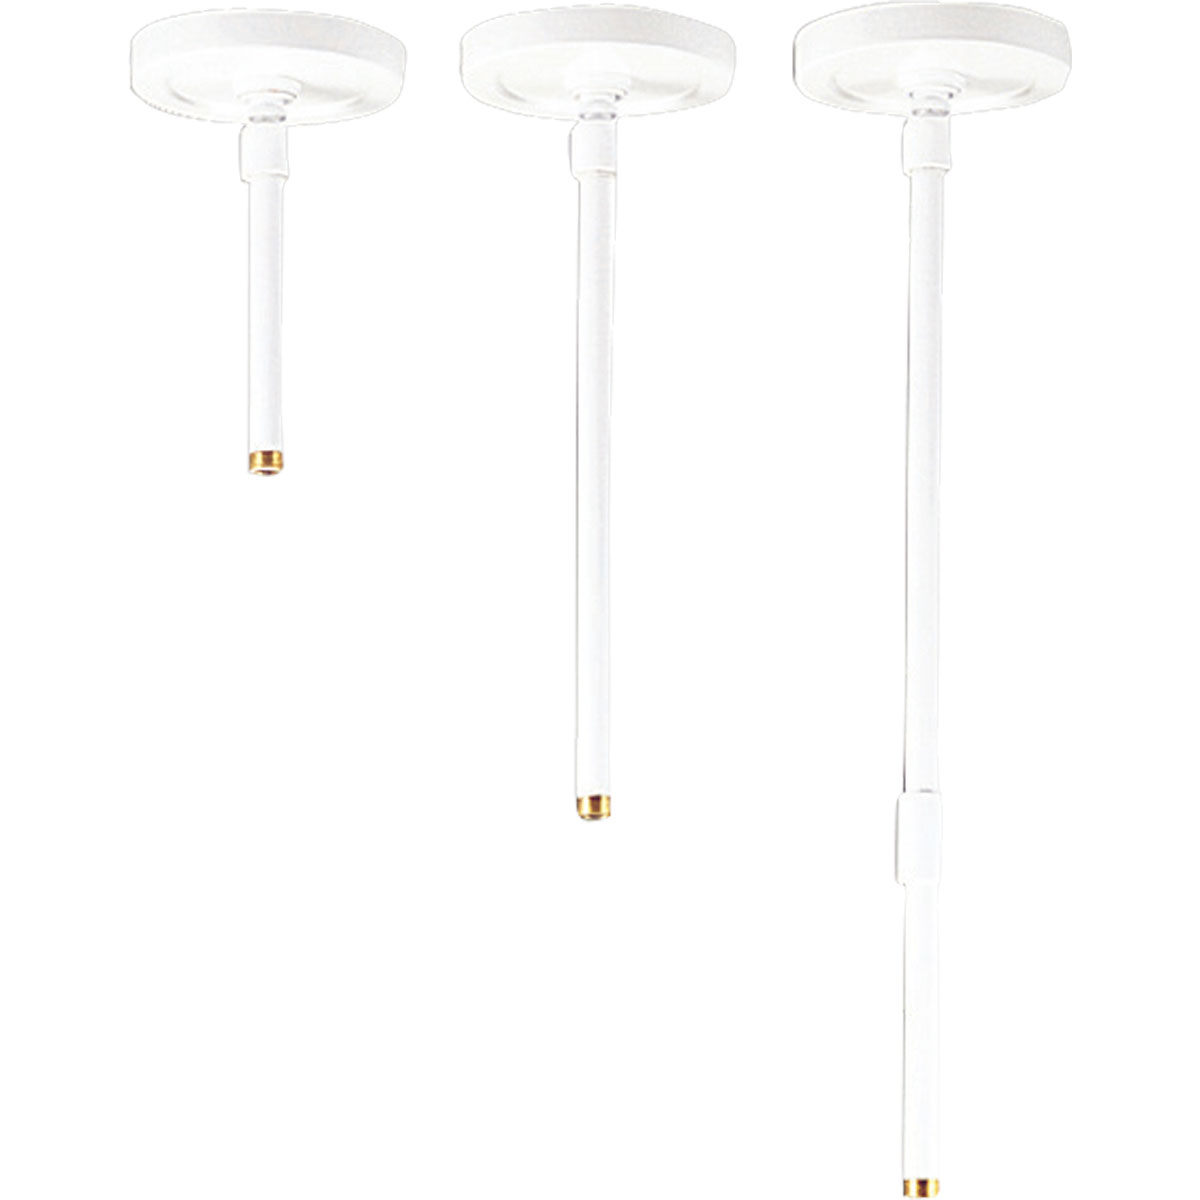 Pendant kit for the 6 inch P5741 series of Cylinders. Allows for the flush mount cylinder to be stem hung. Includes canopy, hang-straight swivel, 6 inch and 12 inch sections with coupling. White Finish.